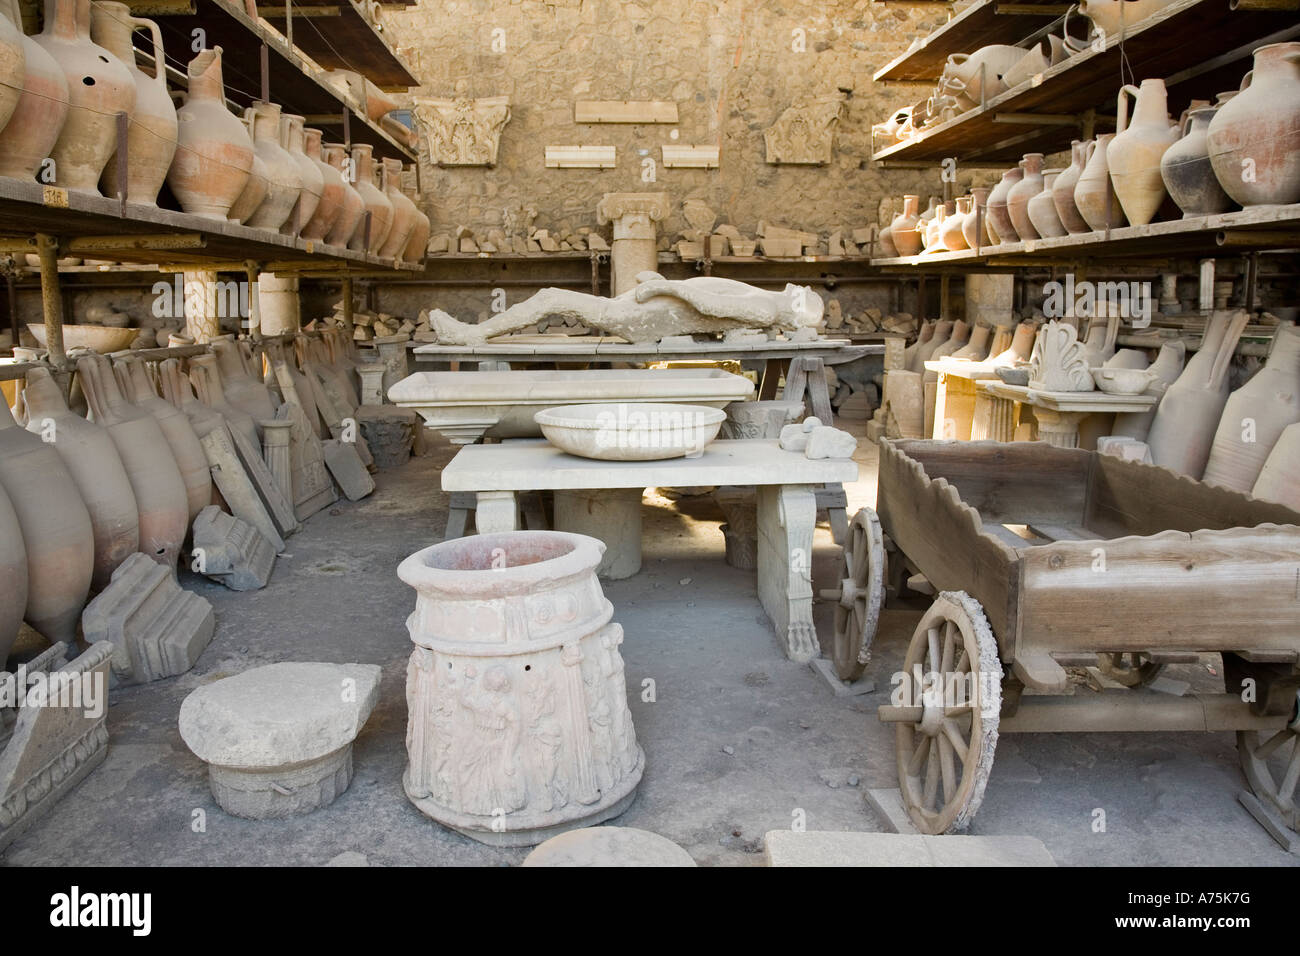 Pompeii, Campania, Italy; artifacts recovered during excavation including a cast of a human body. Stock Photo